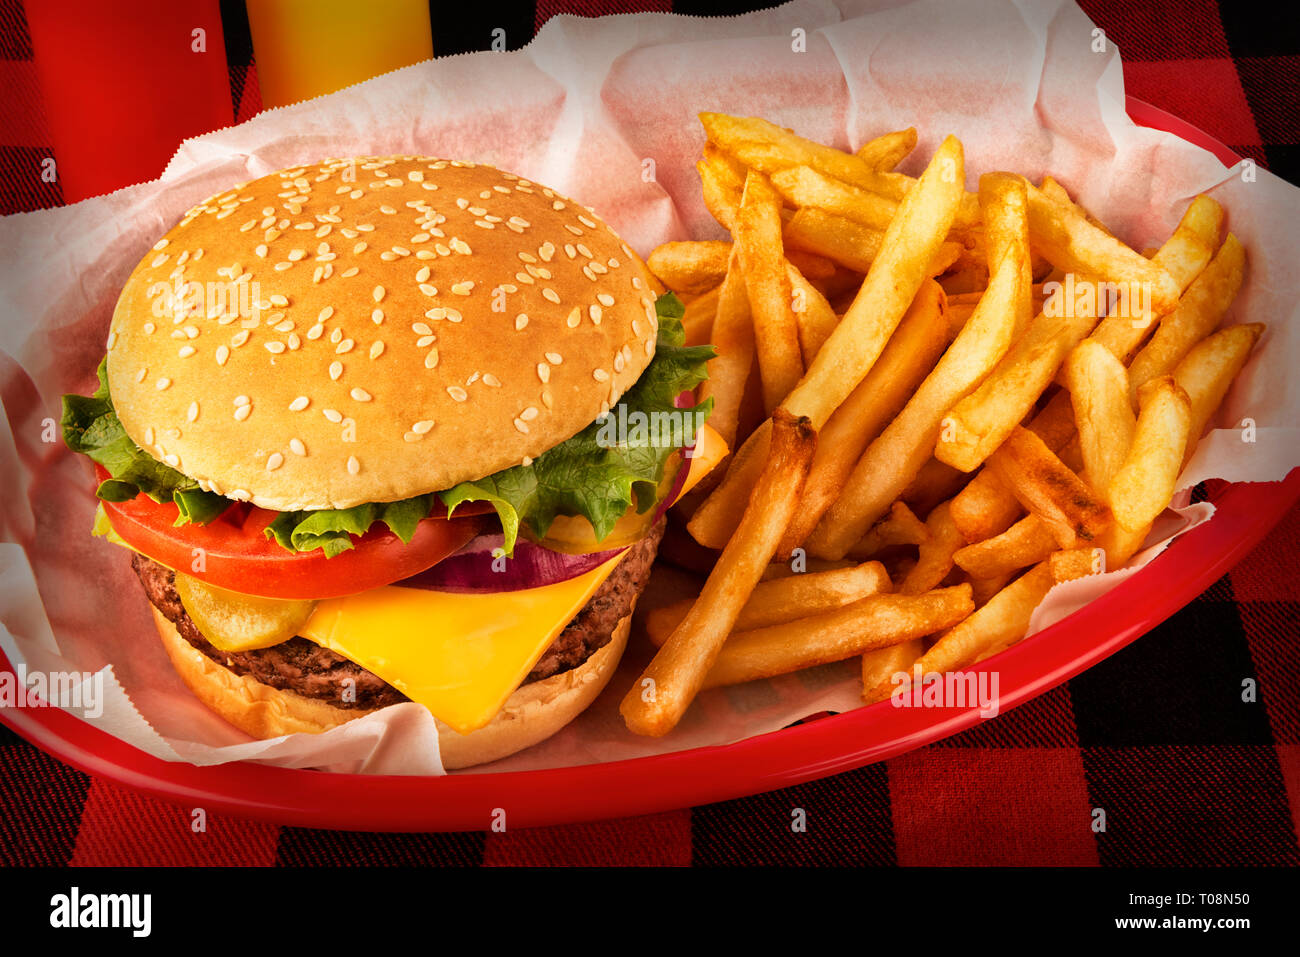 Burger and french fries in basket on tartan tablecloth. Ketchup and mustard bottle in background. Close up. Stock Photo